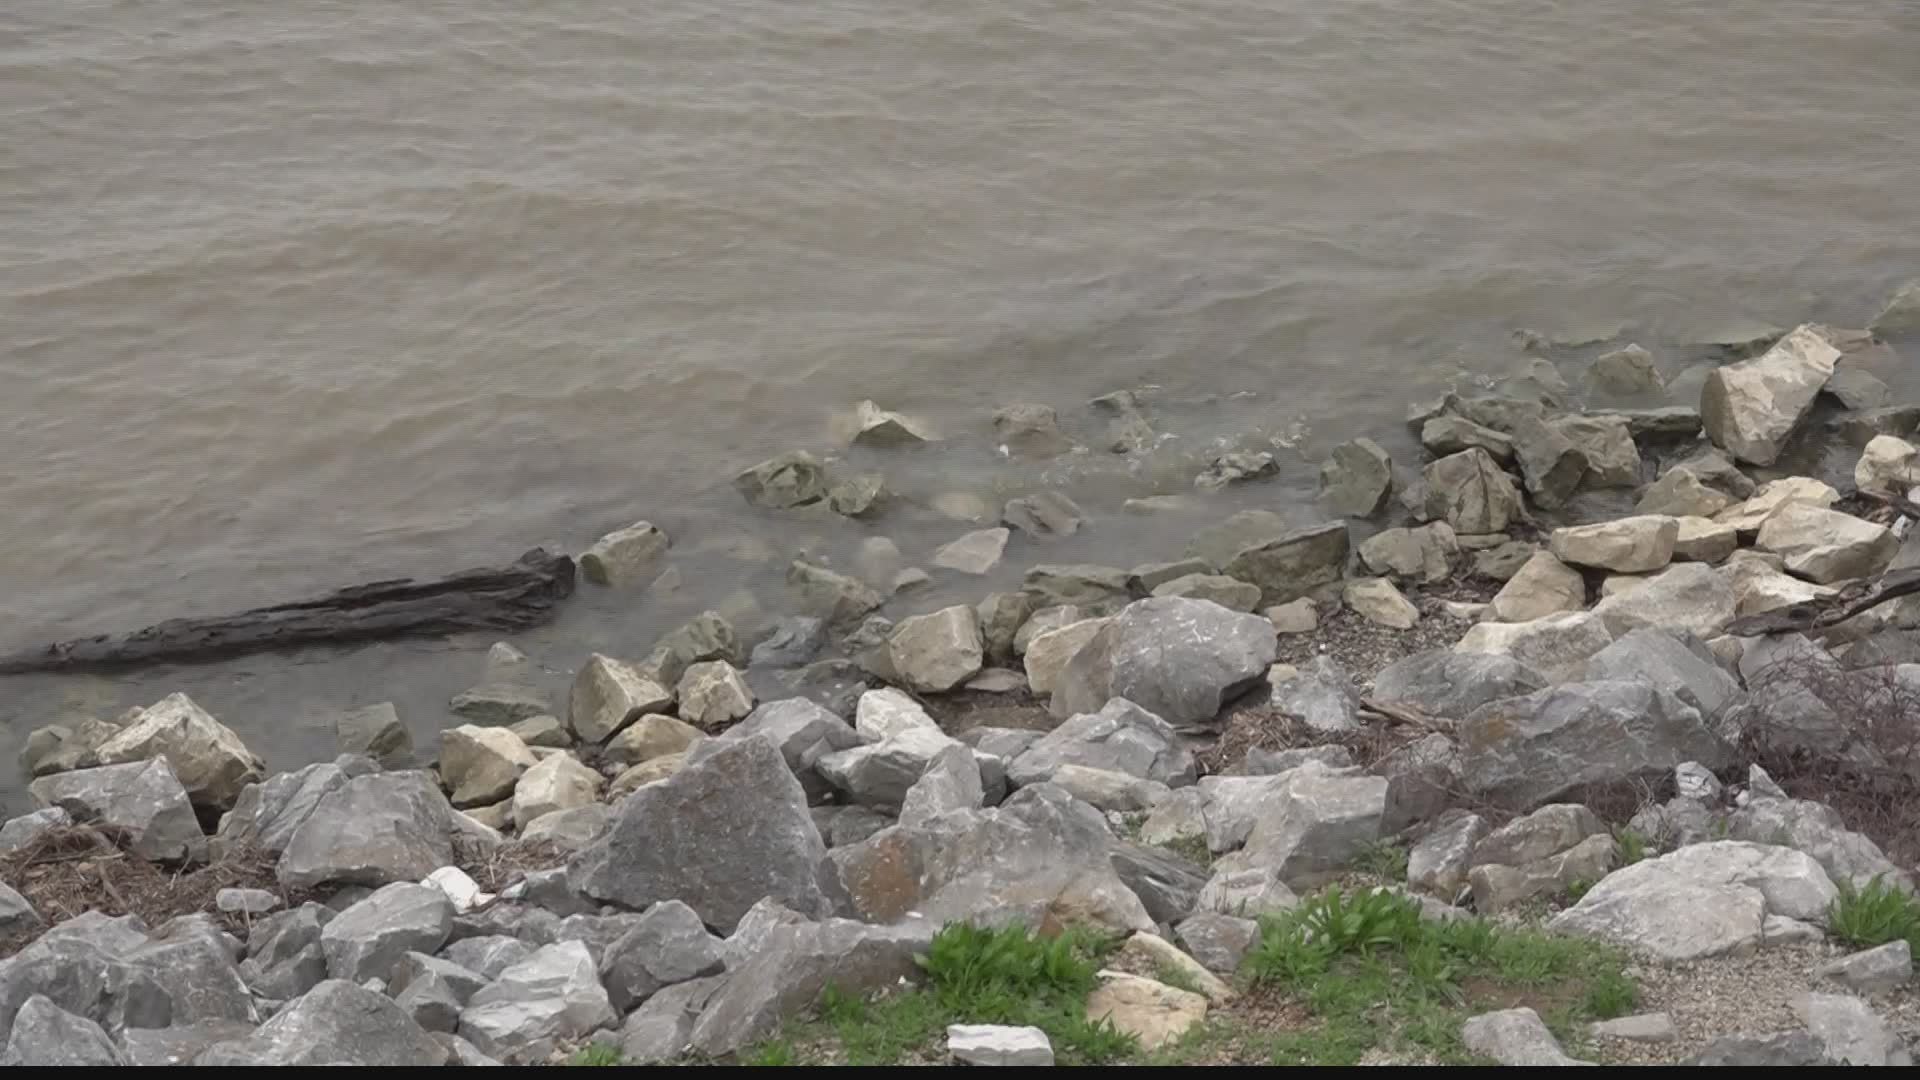 On March 29, 2019, Tennessee Riverkeeper sent a  notice of intent to sue Decatur Utilities for the sewage pollution.